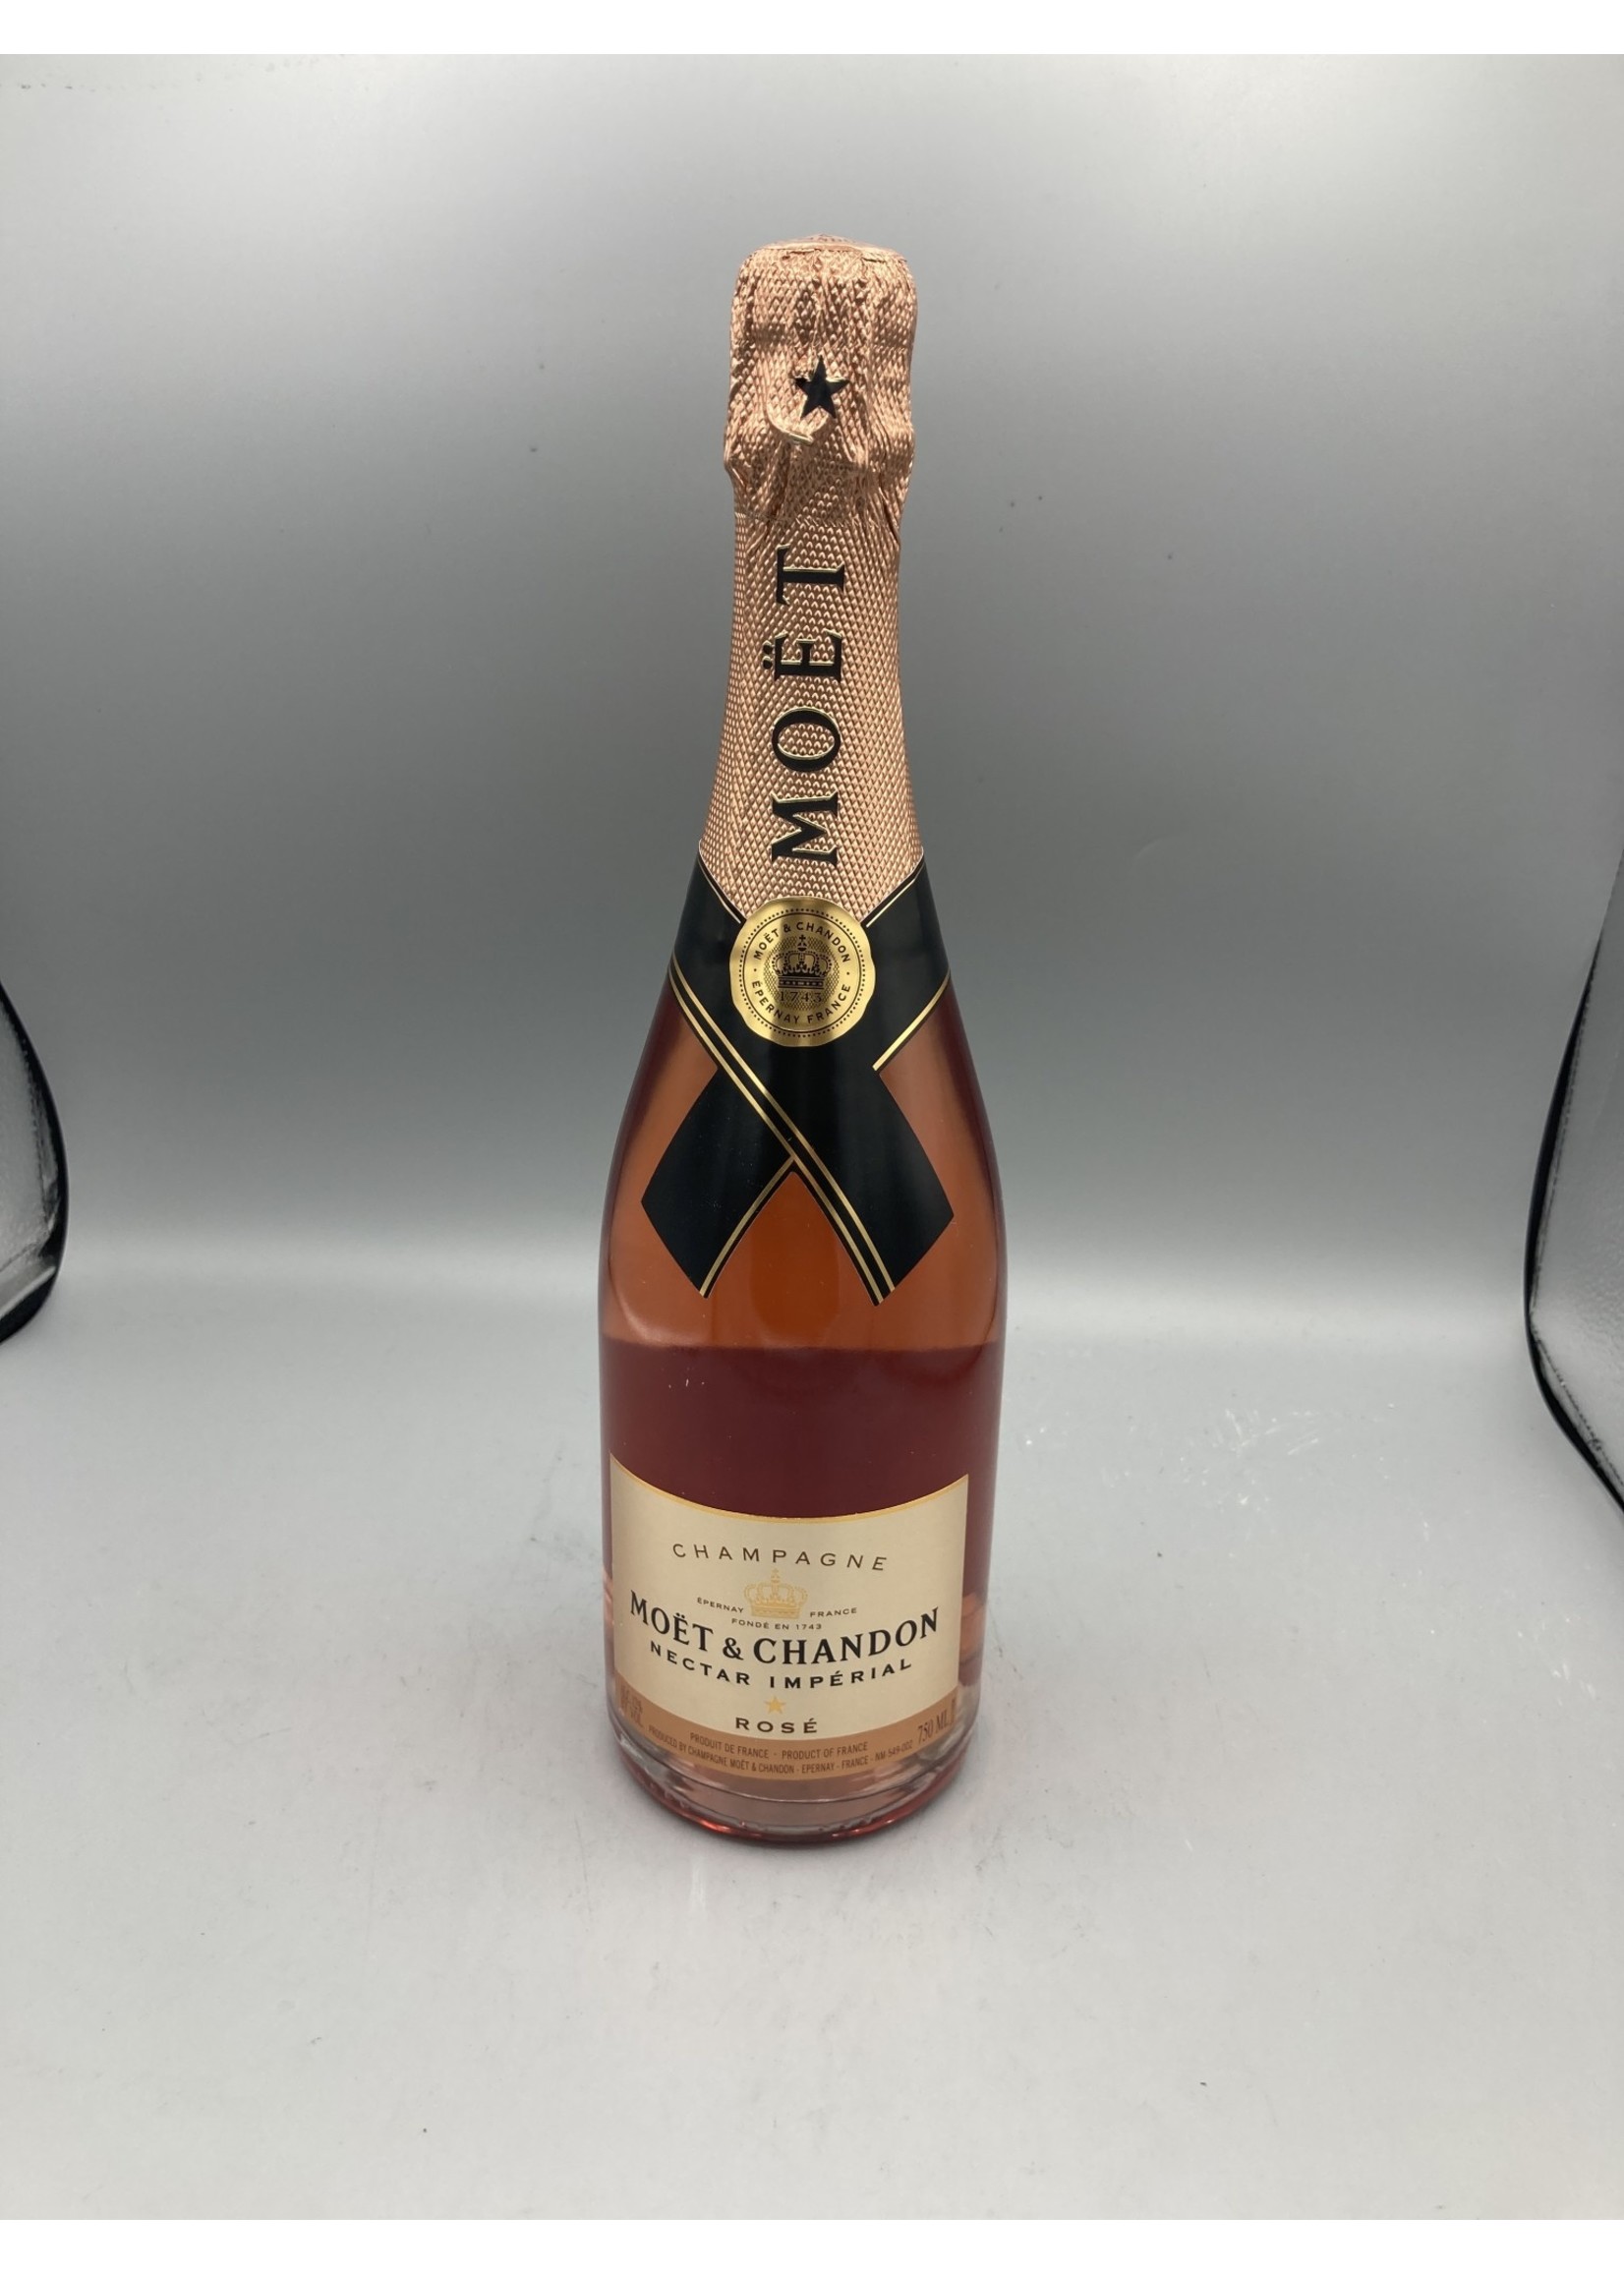 Moet & Chandon Nectar Imperial Rose Champagne (750 ml)